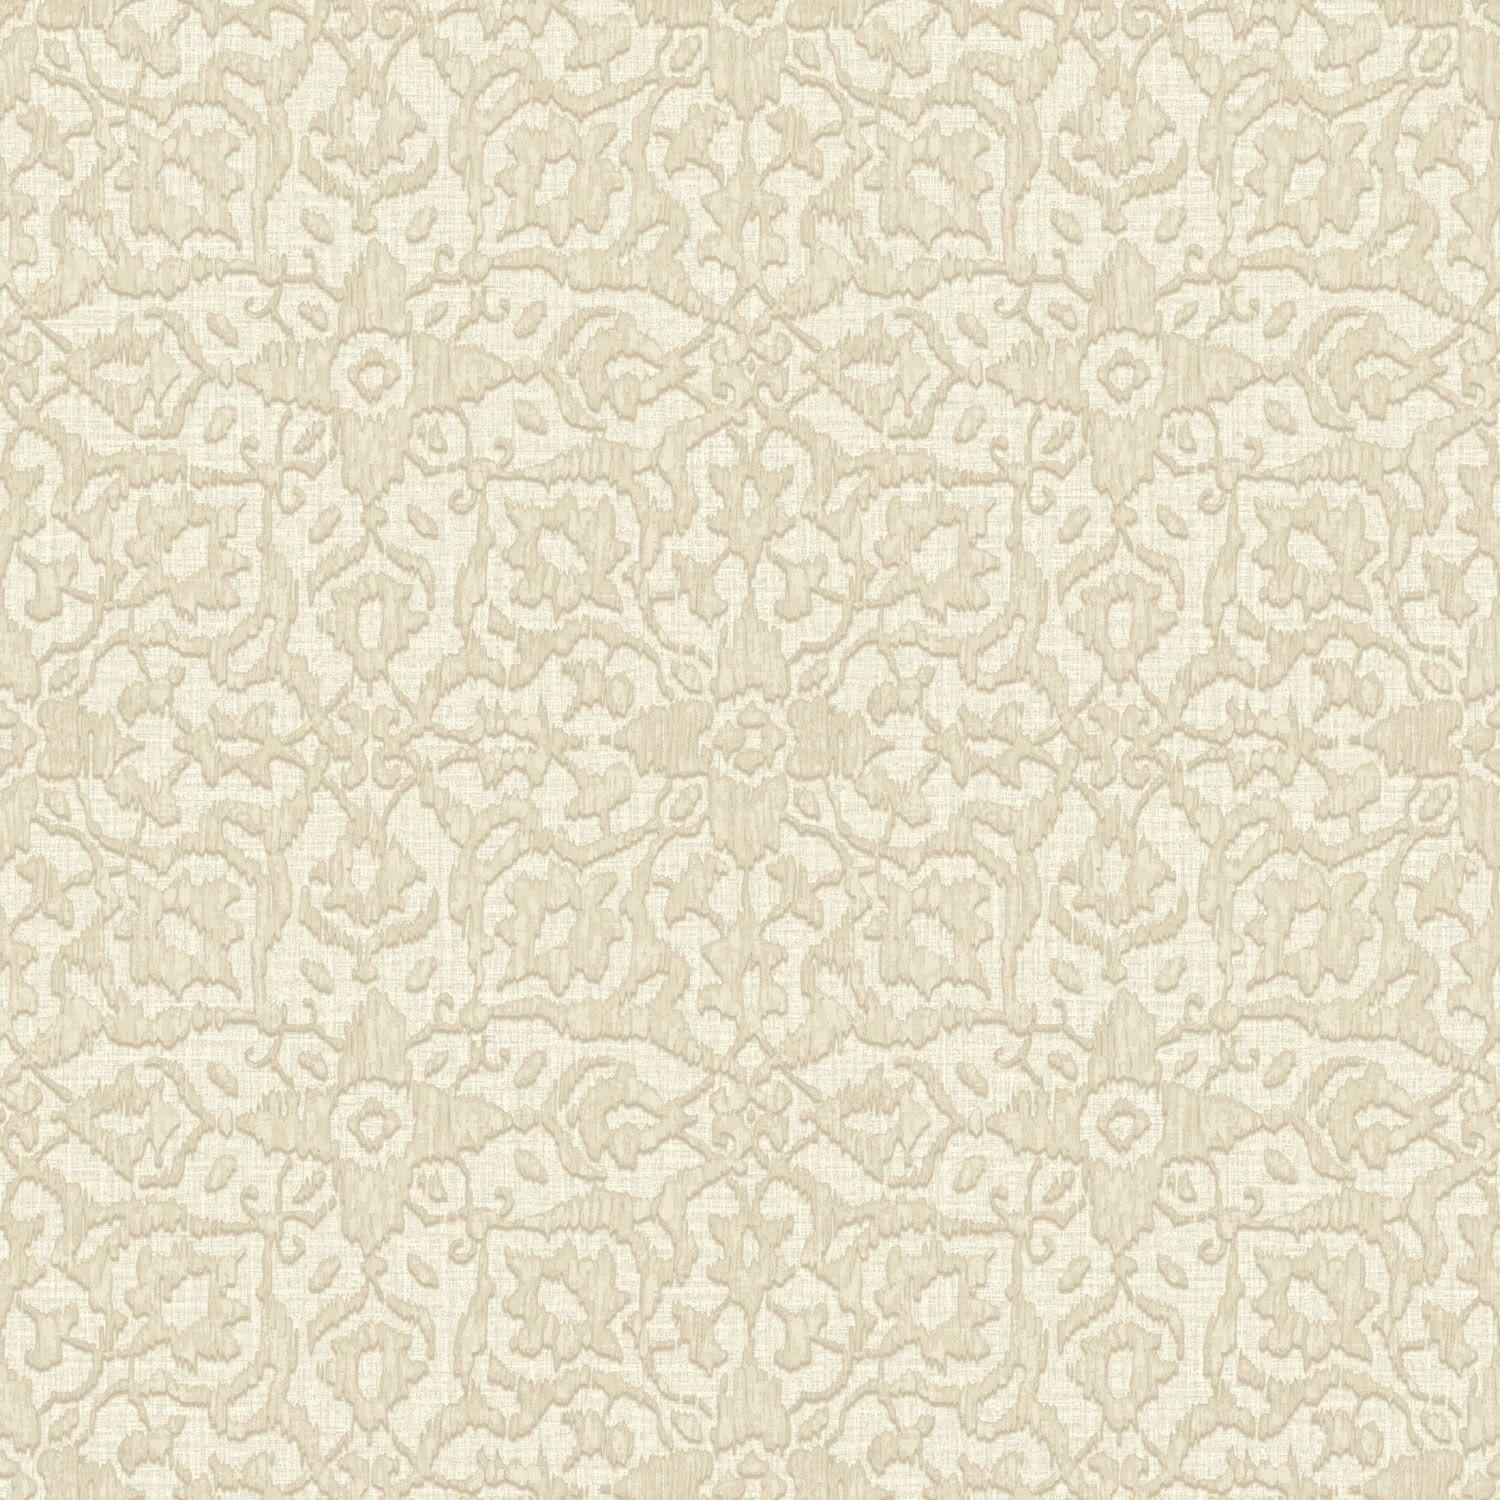 Chic Patterned Background. Patterned